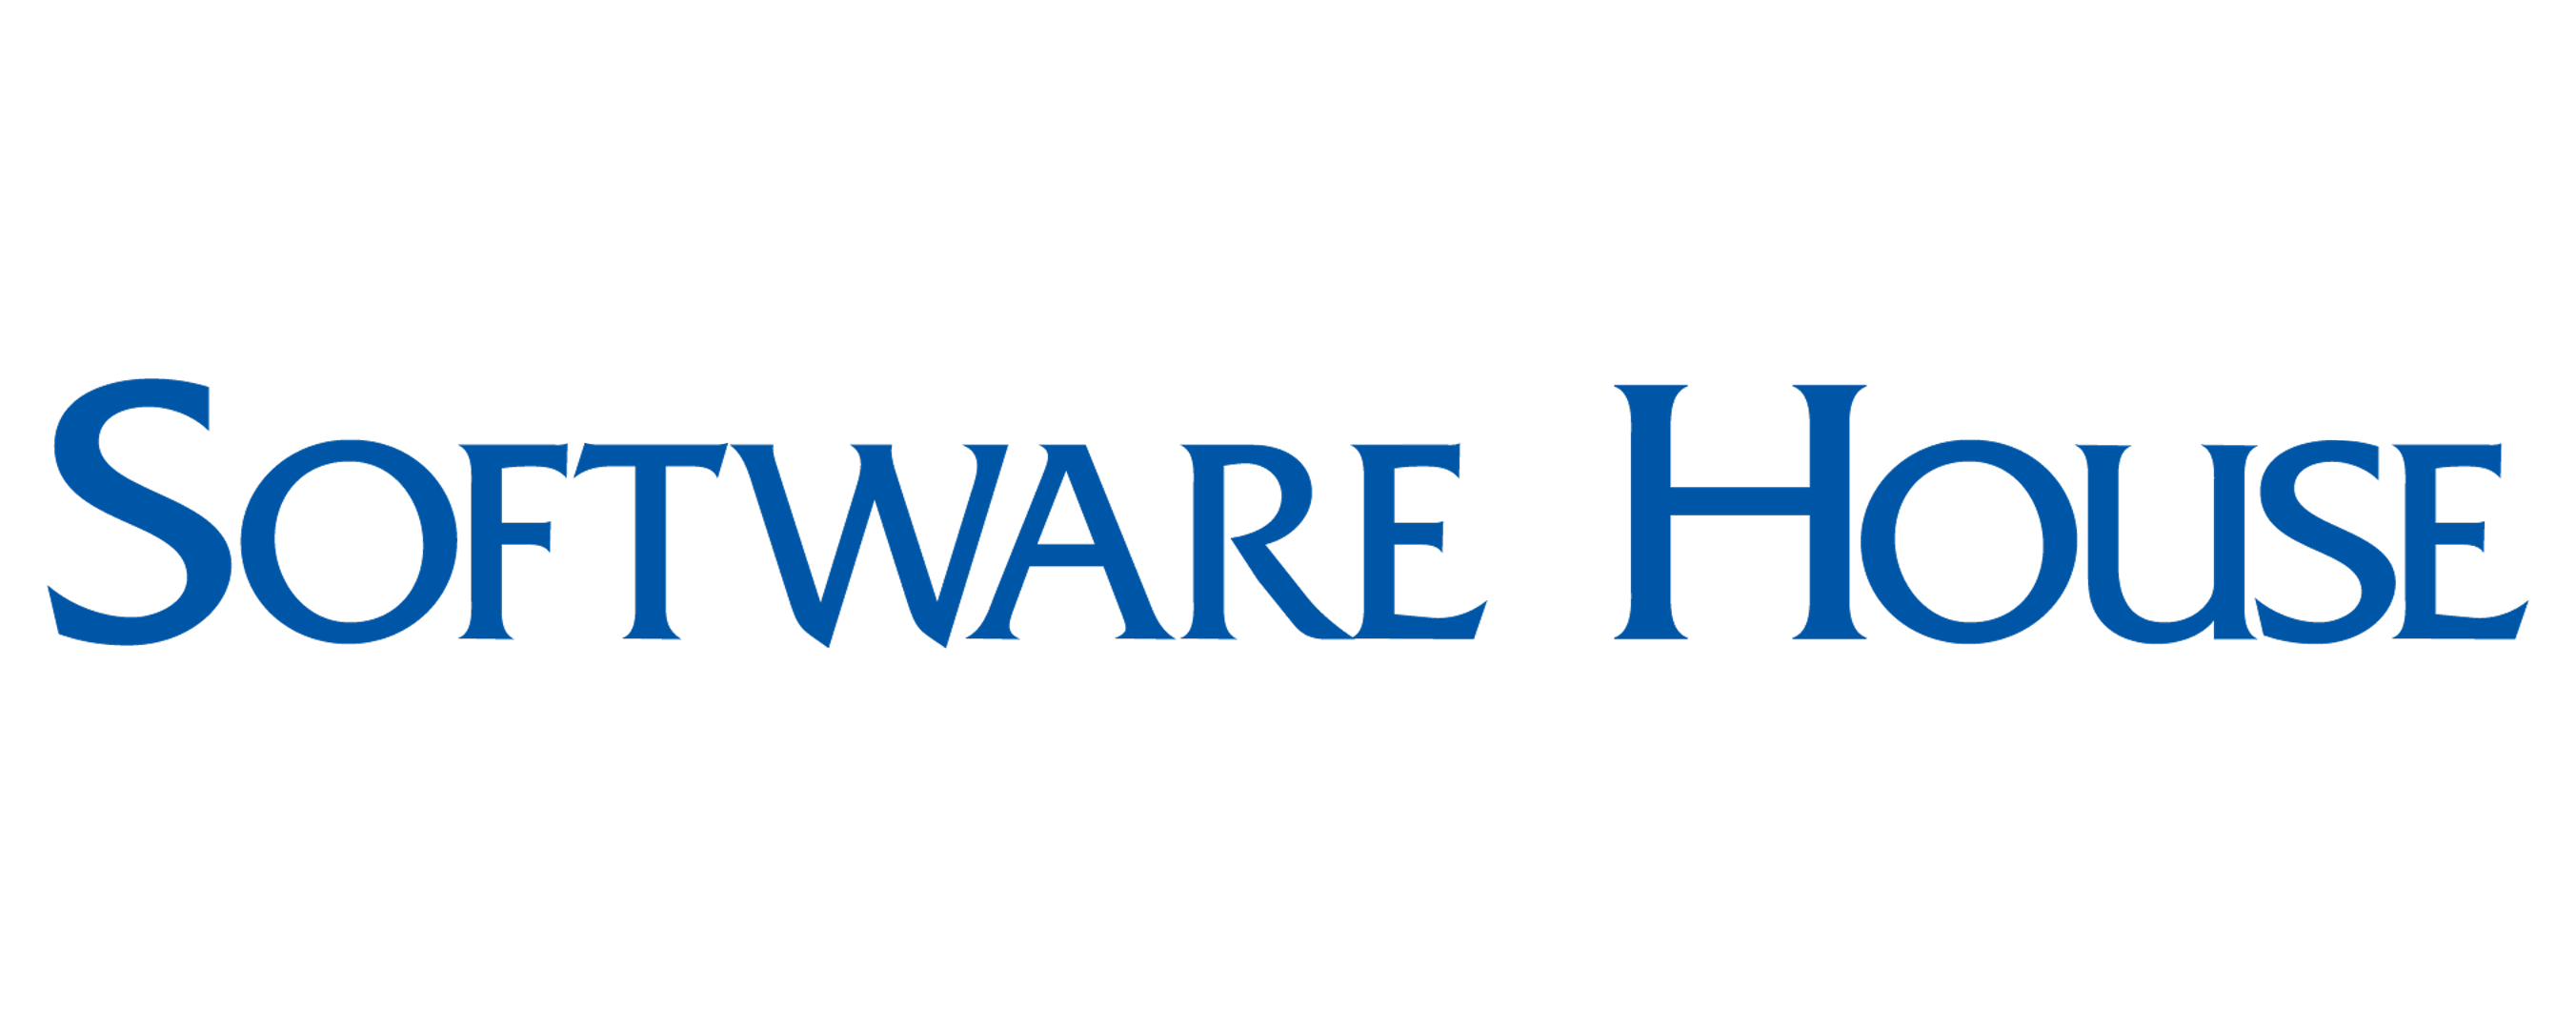 Software-House-Small-Logo